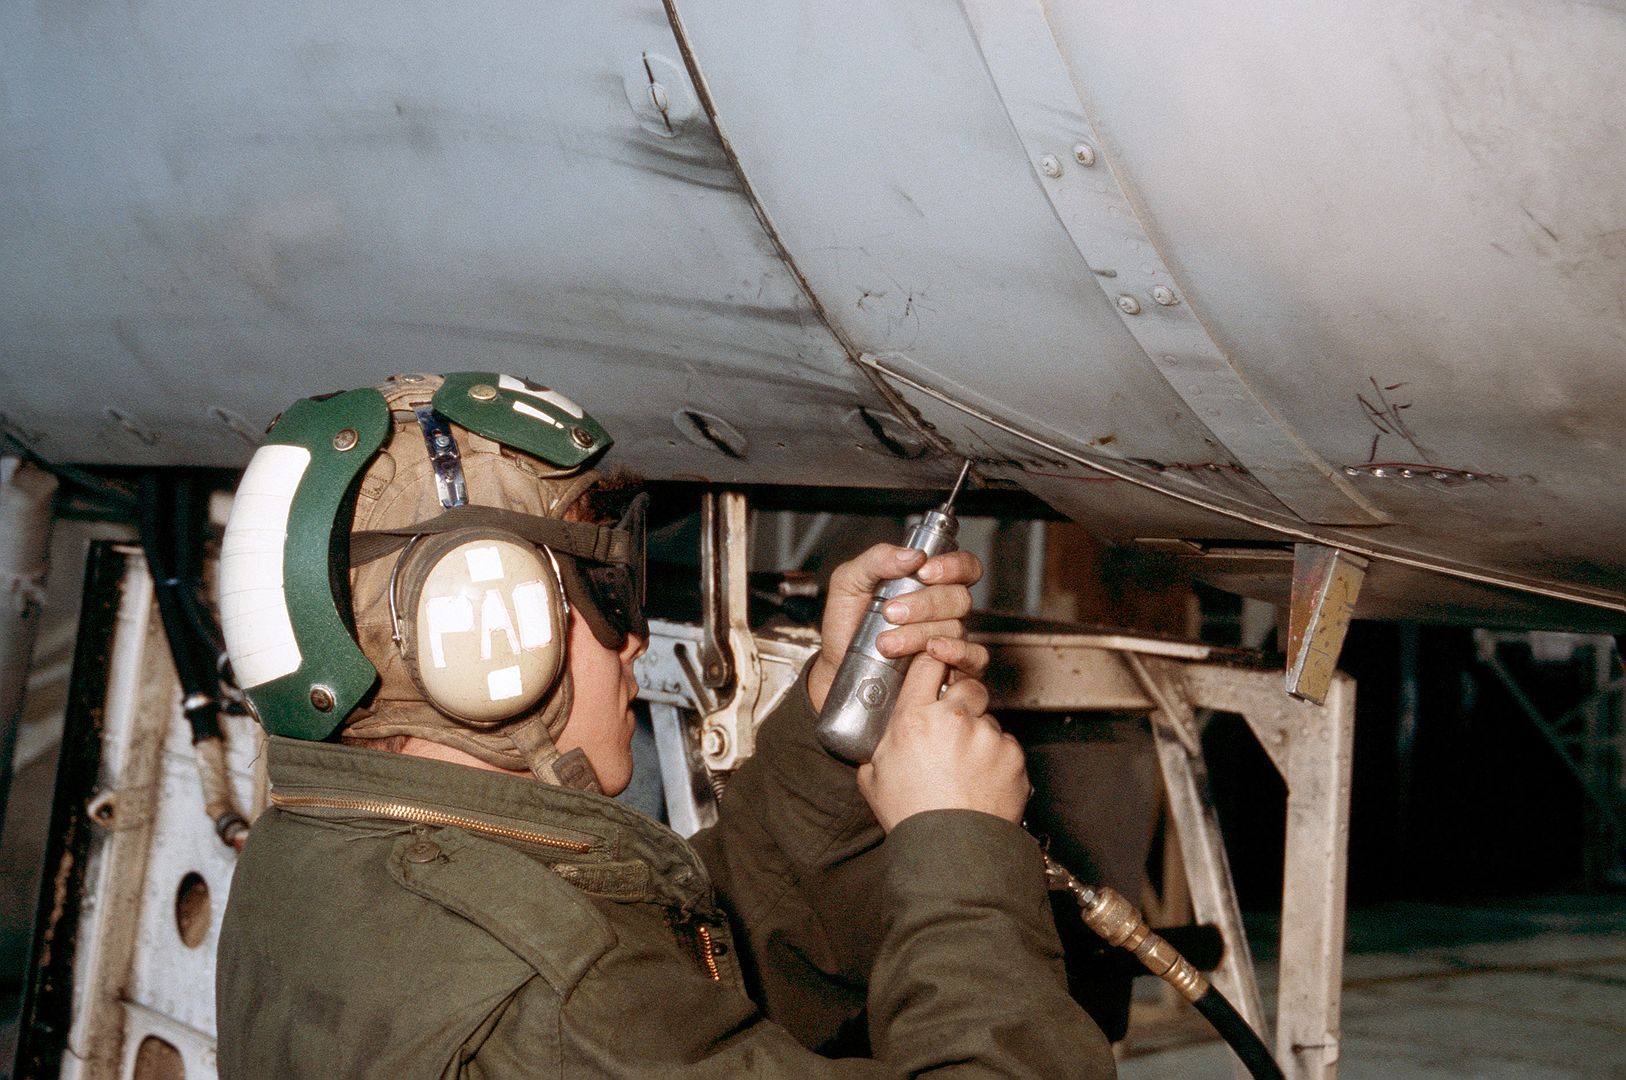 A Maintenance Crewman Uses An Air Wrench To Tighten A Panel On An A 6E Intruder Aircraft From Attack Squadron 35 As The Squadron Prepares To Deploy To The Western Pacific Aboard The Nuclear Powered Aircraft Carrier USS NIMITZ